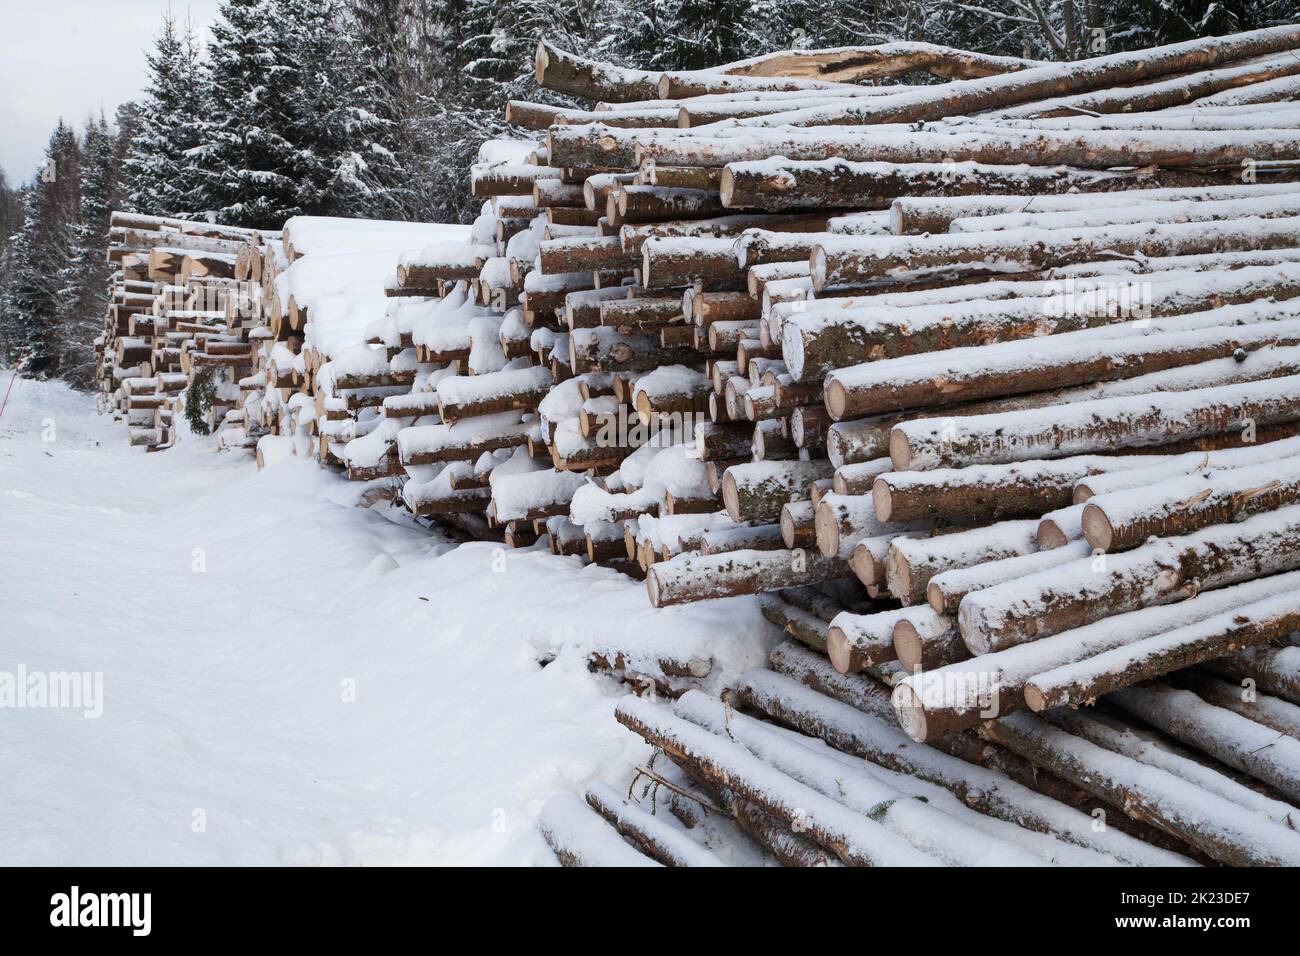 A TIMBER WOODPILE  in winter Stock Photo